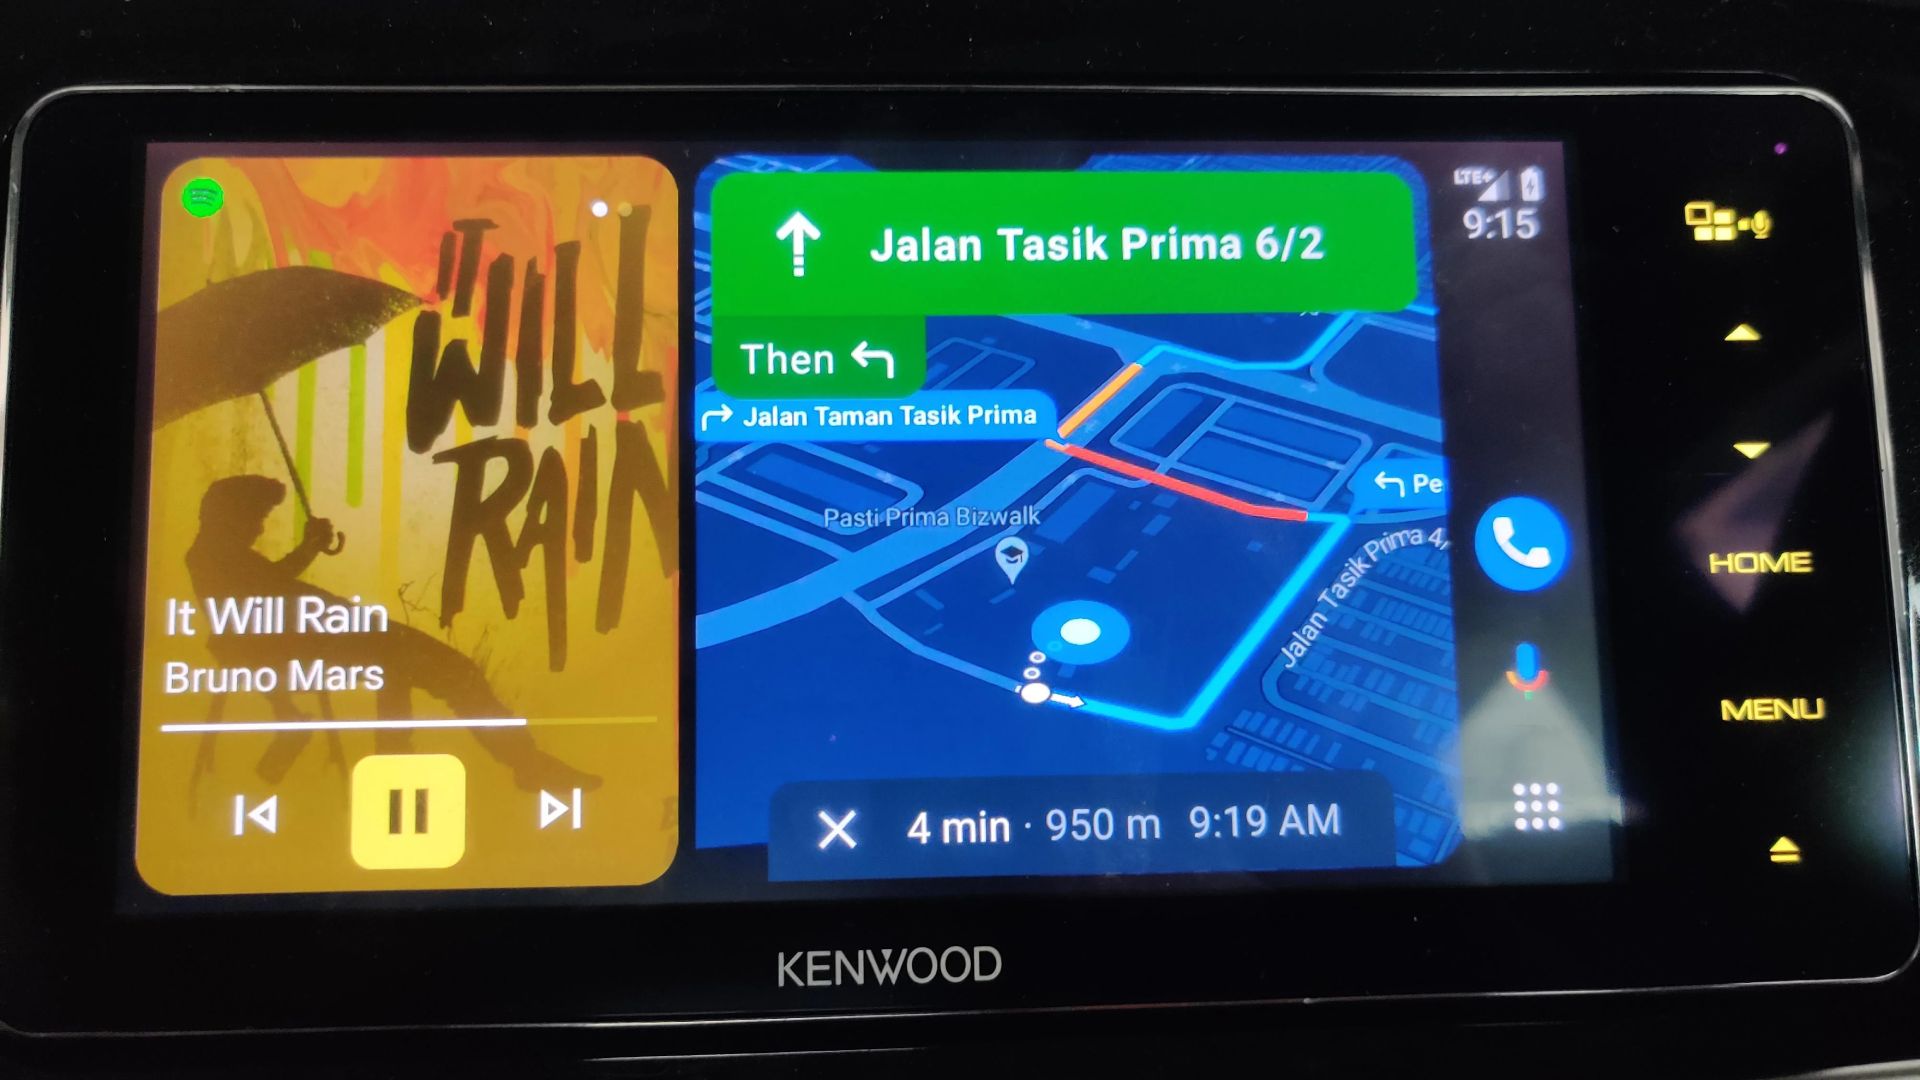 Android Auto soplit screen working on a 7-inch display